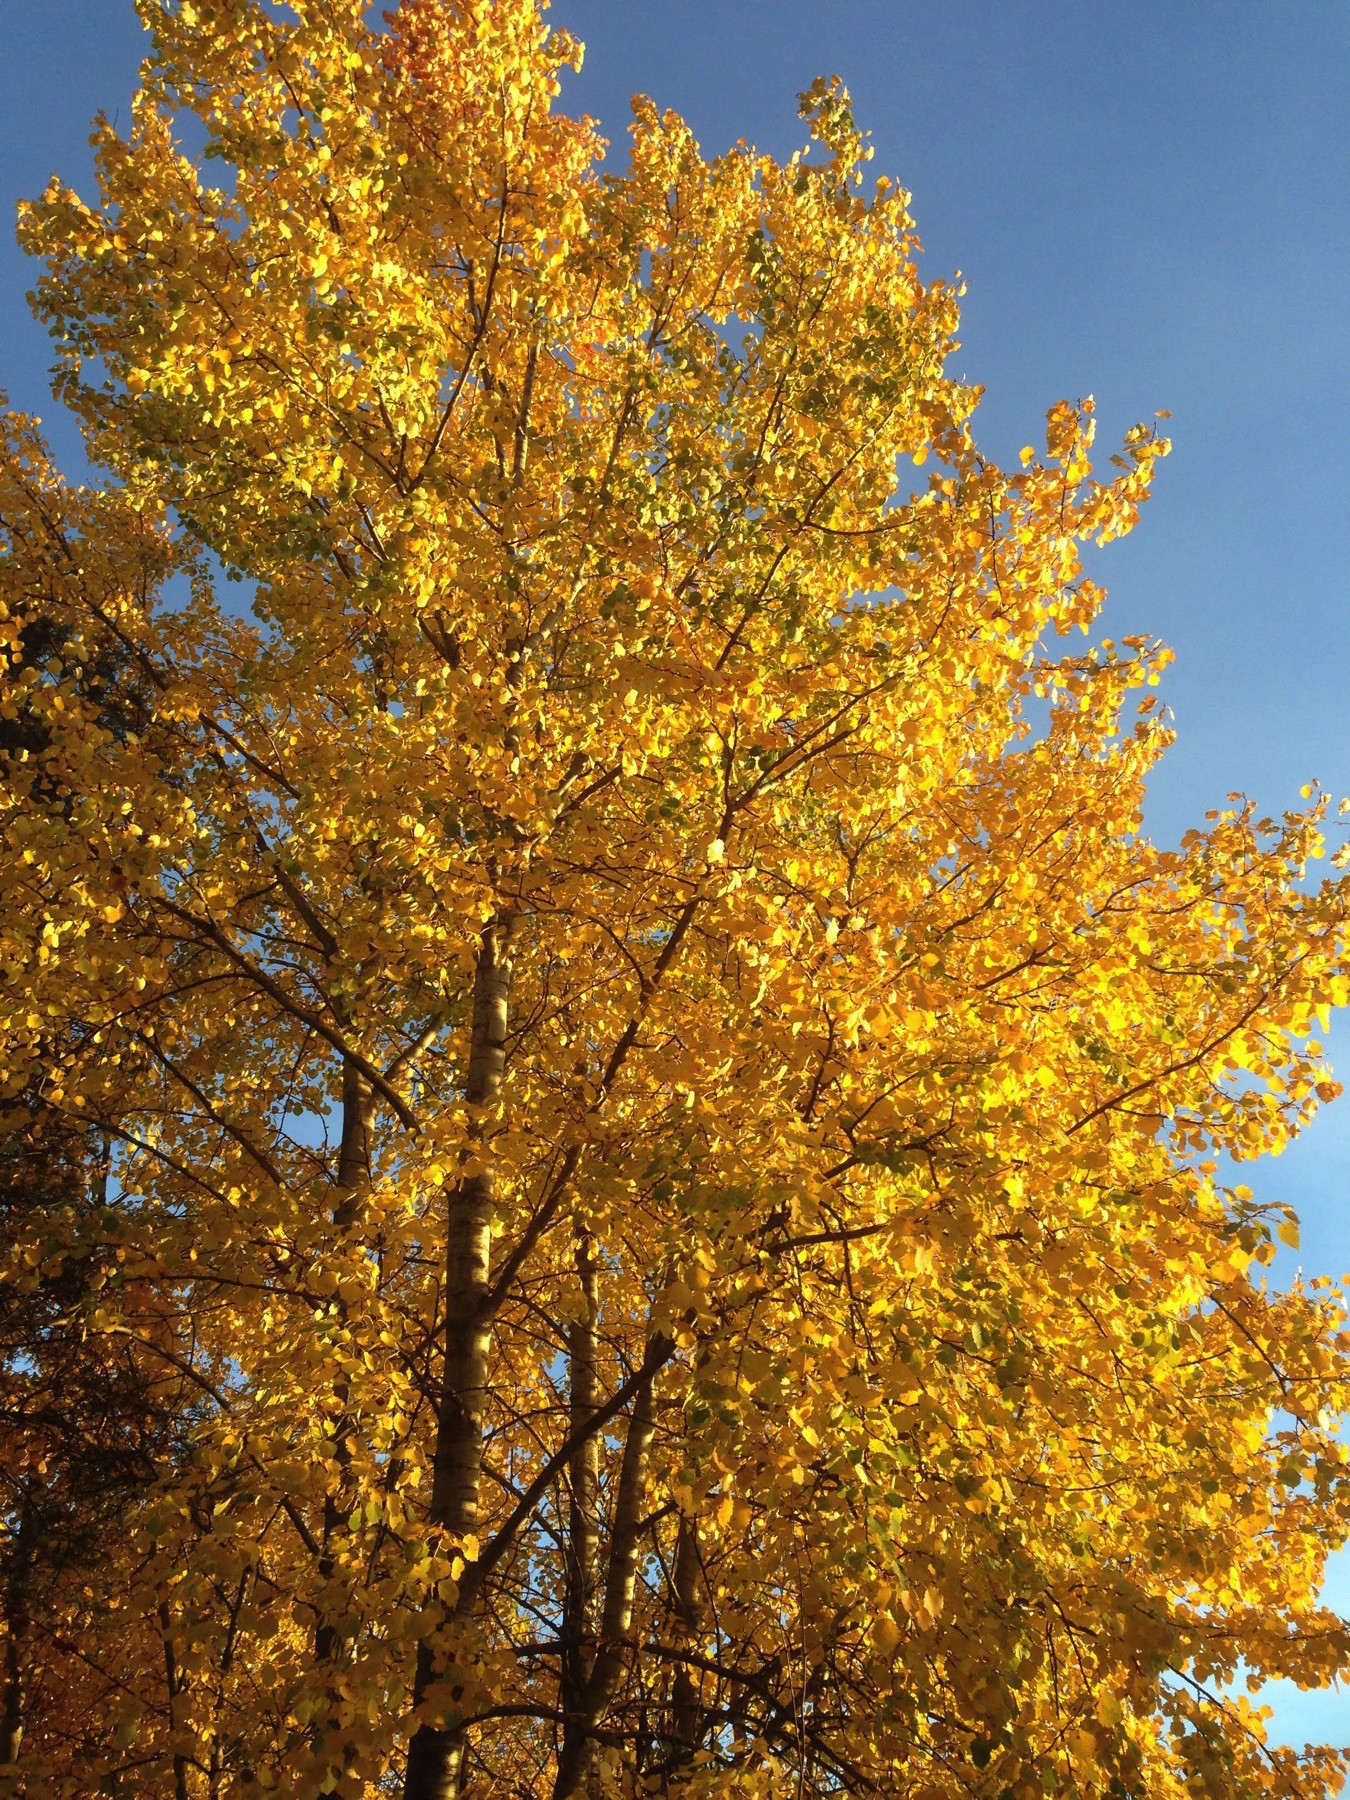 fall foliage, extremely yellow tree and crisp blue sky behind it